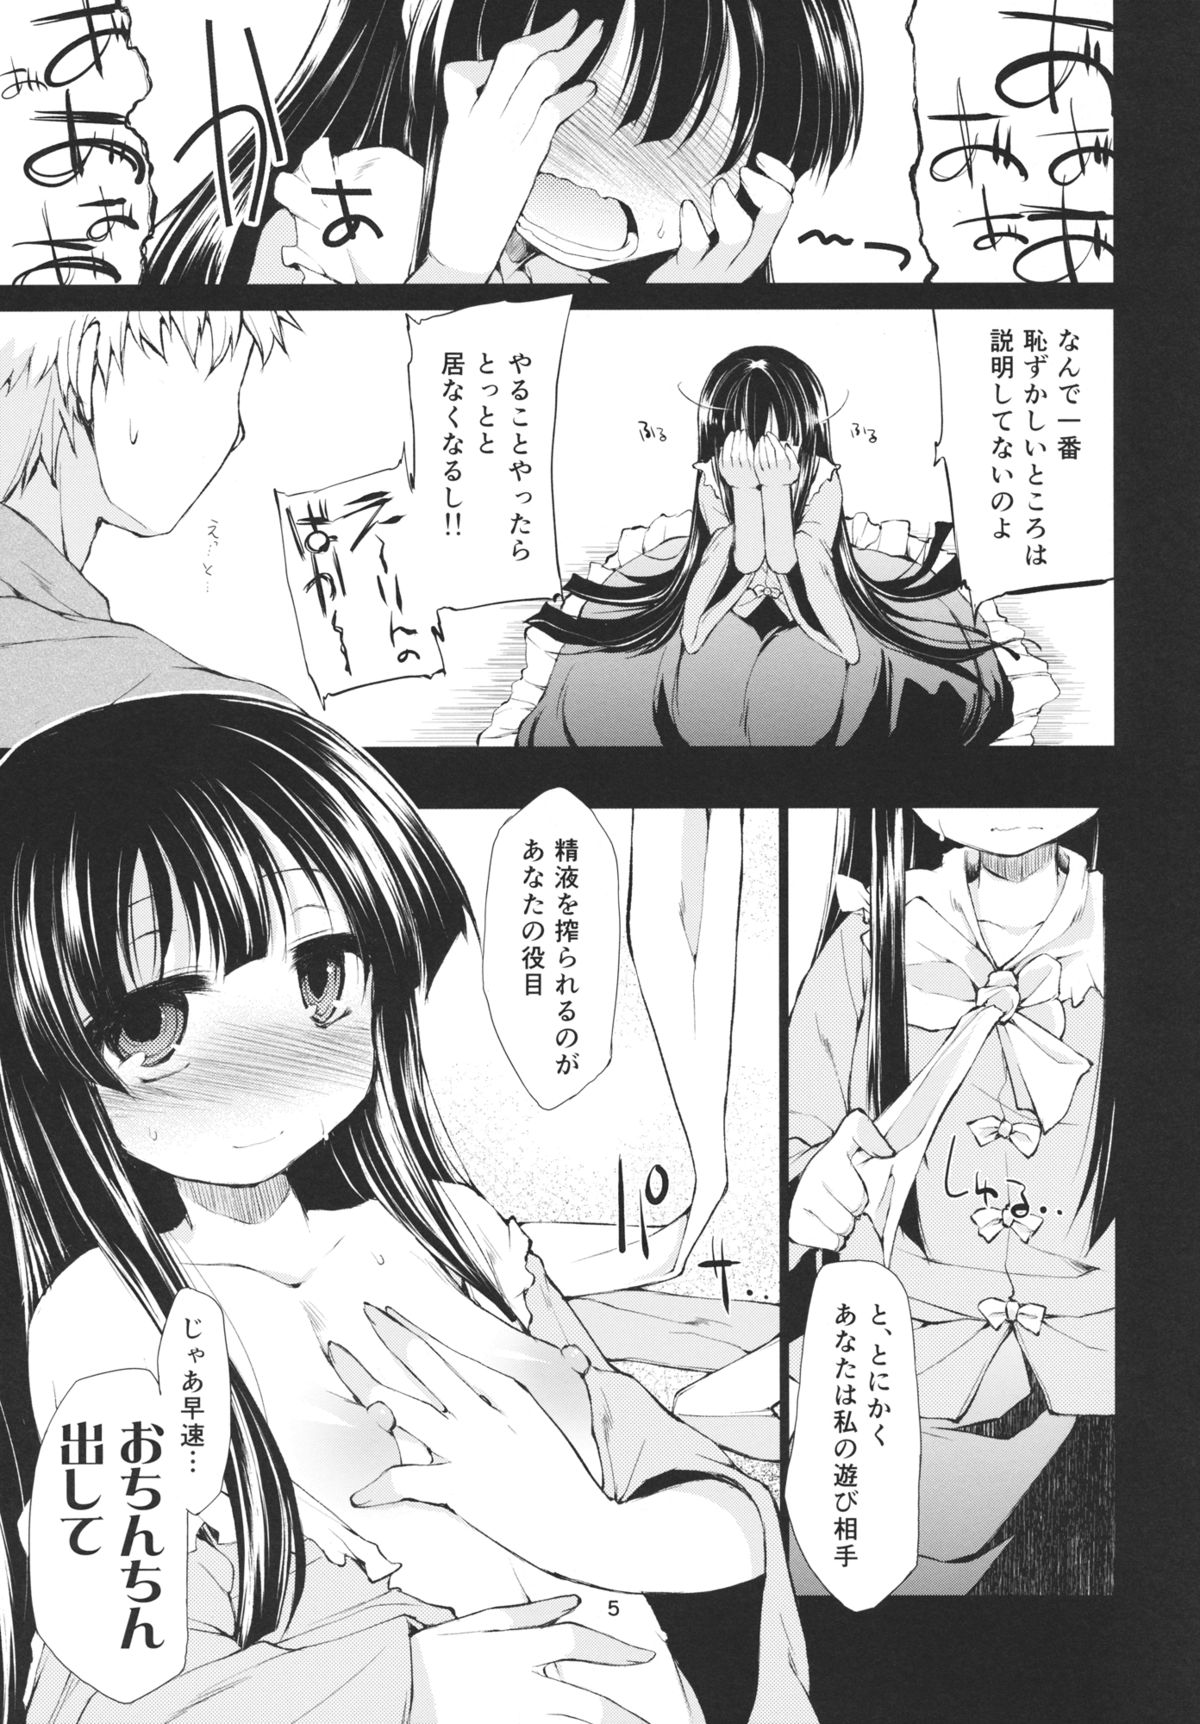 (Kouroumu 9) [IncluDe (Foolest)] Ohimesama to Asobou (Touhou Project) page 4 full